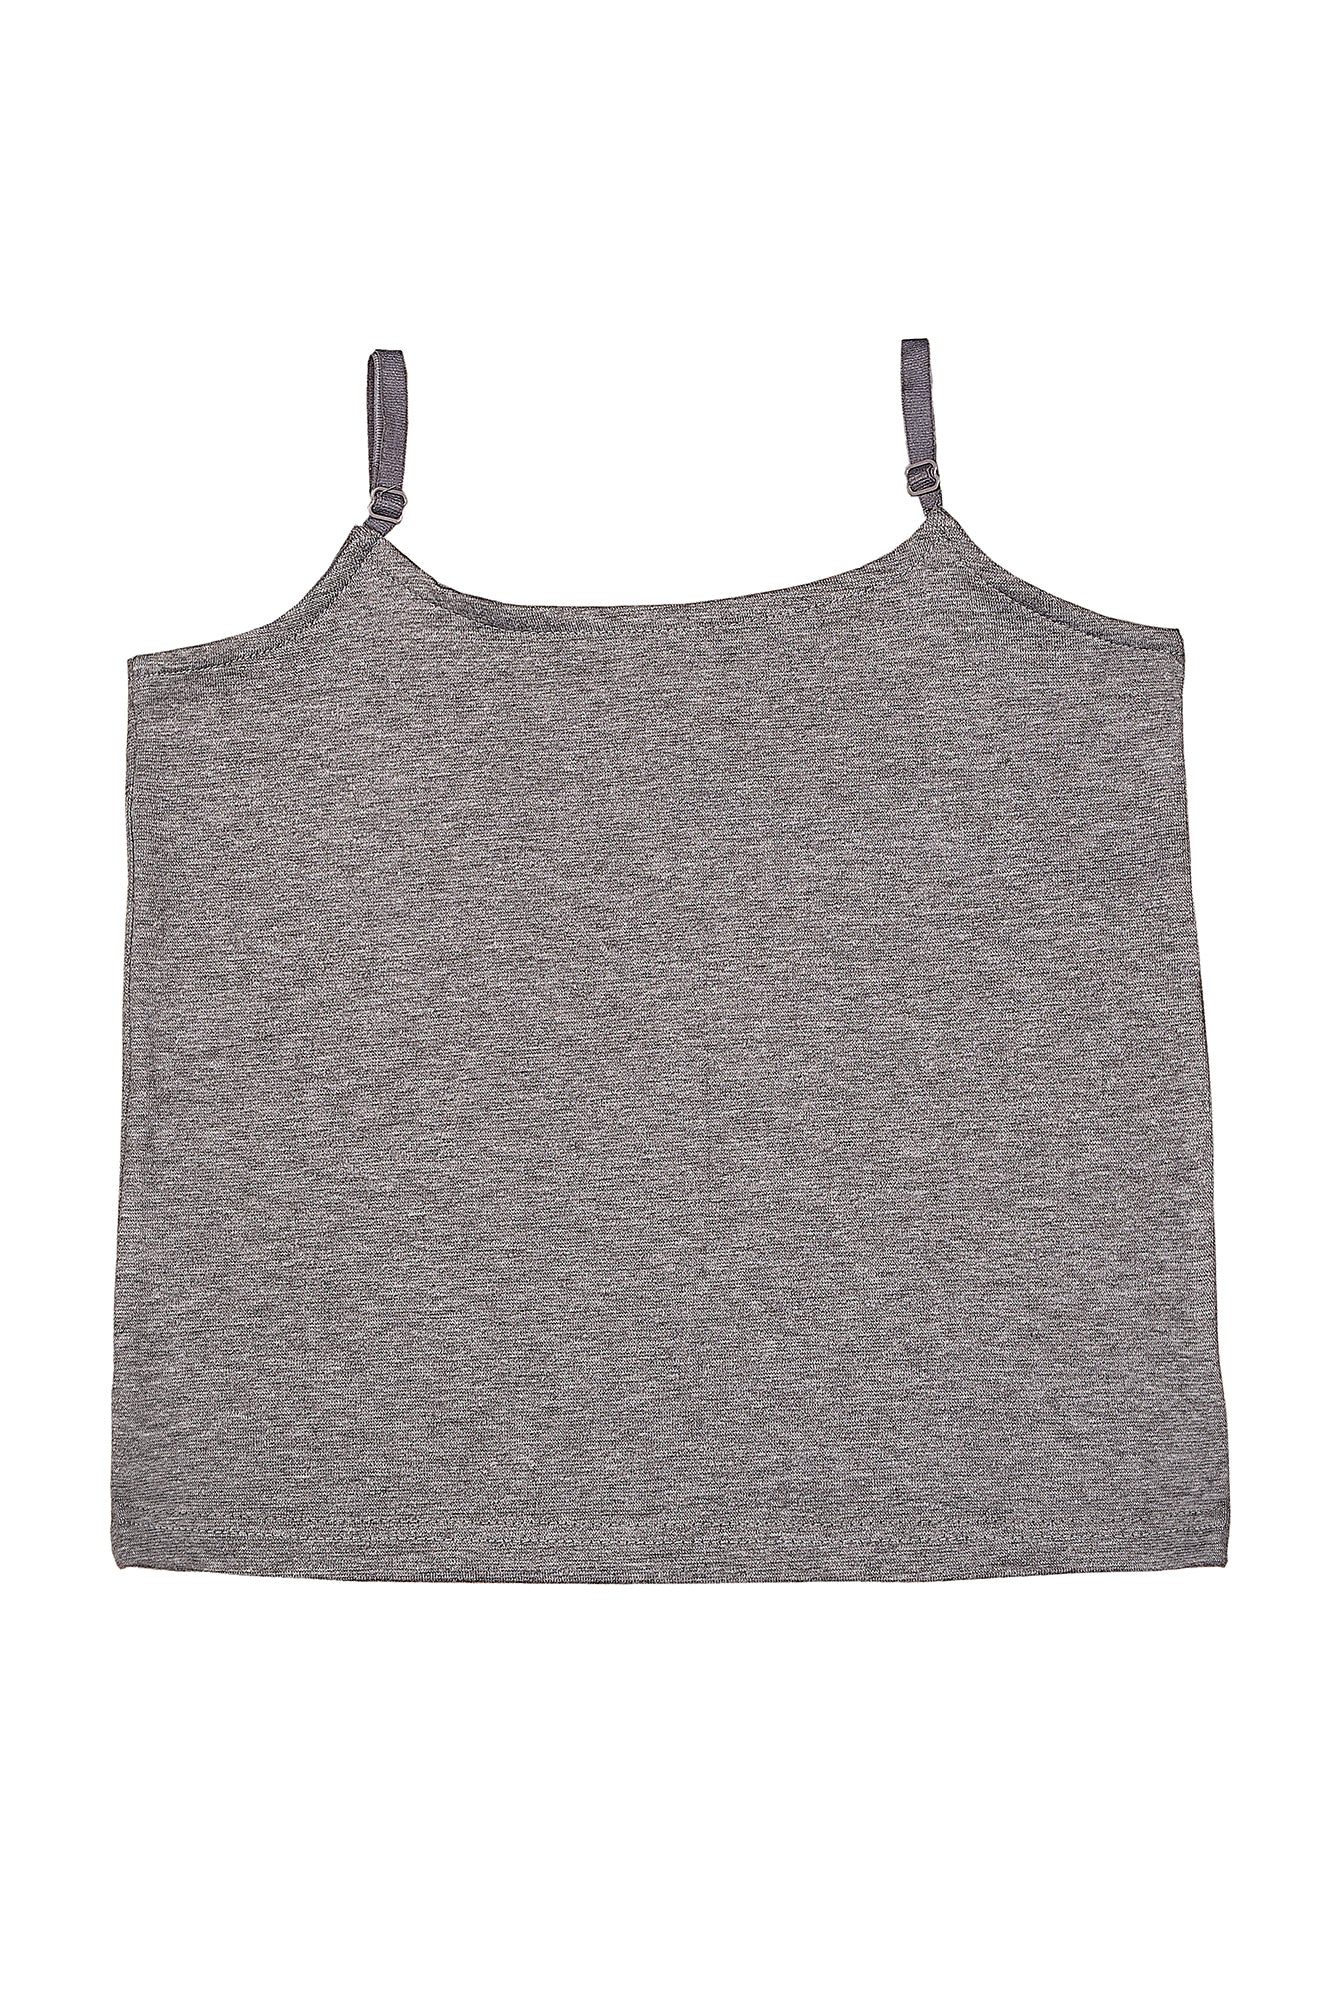 KDS-GC-13062 CAMISOLE H/GREY